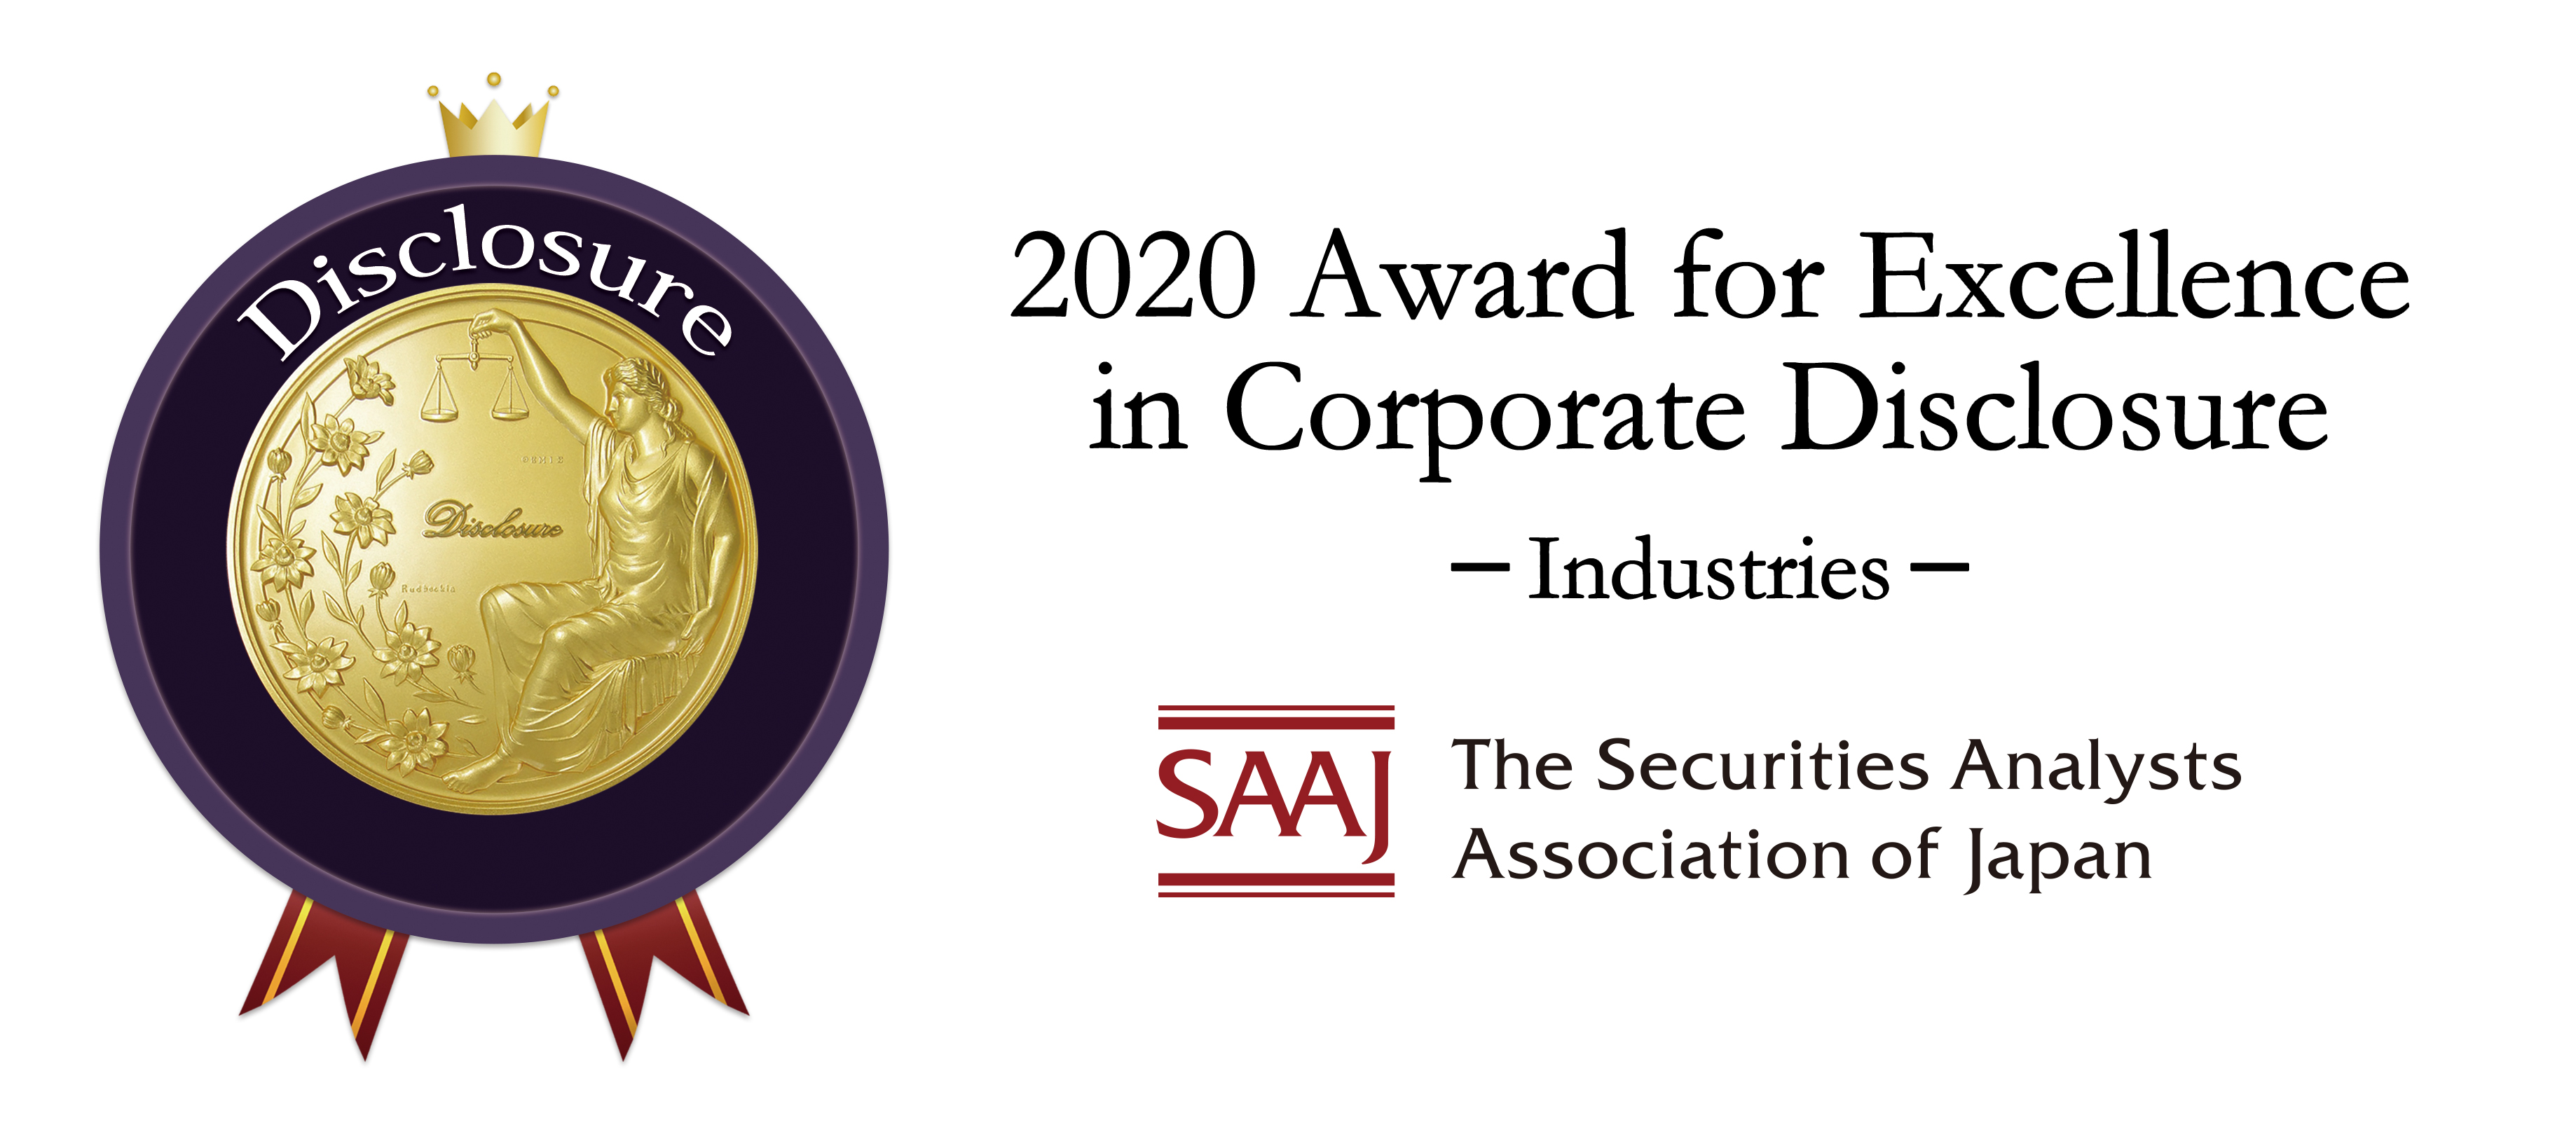 Award for Excellence in Corporate Disclosure 2020 logo